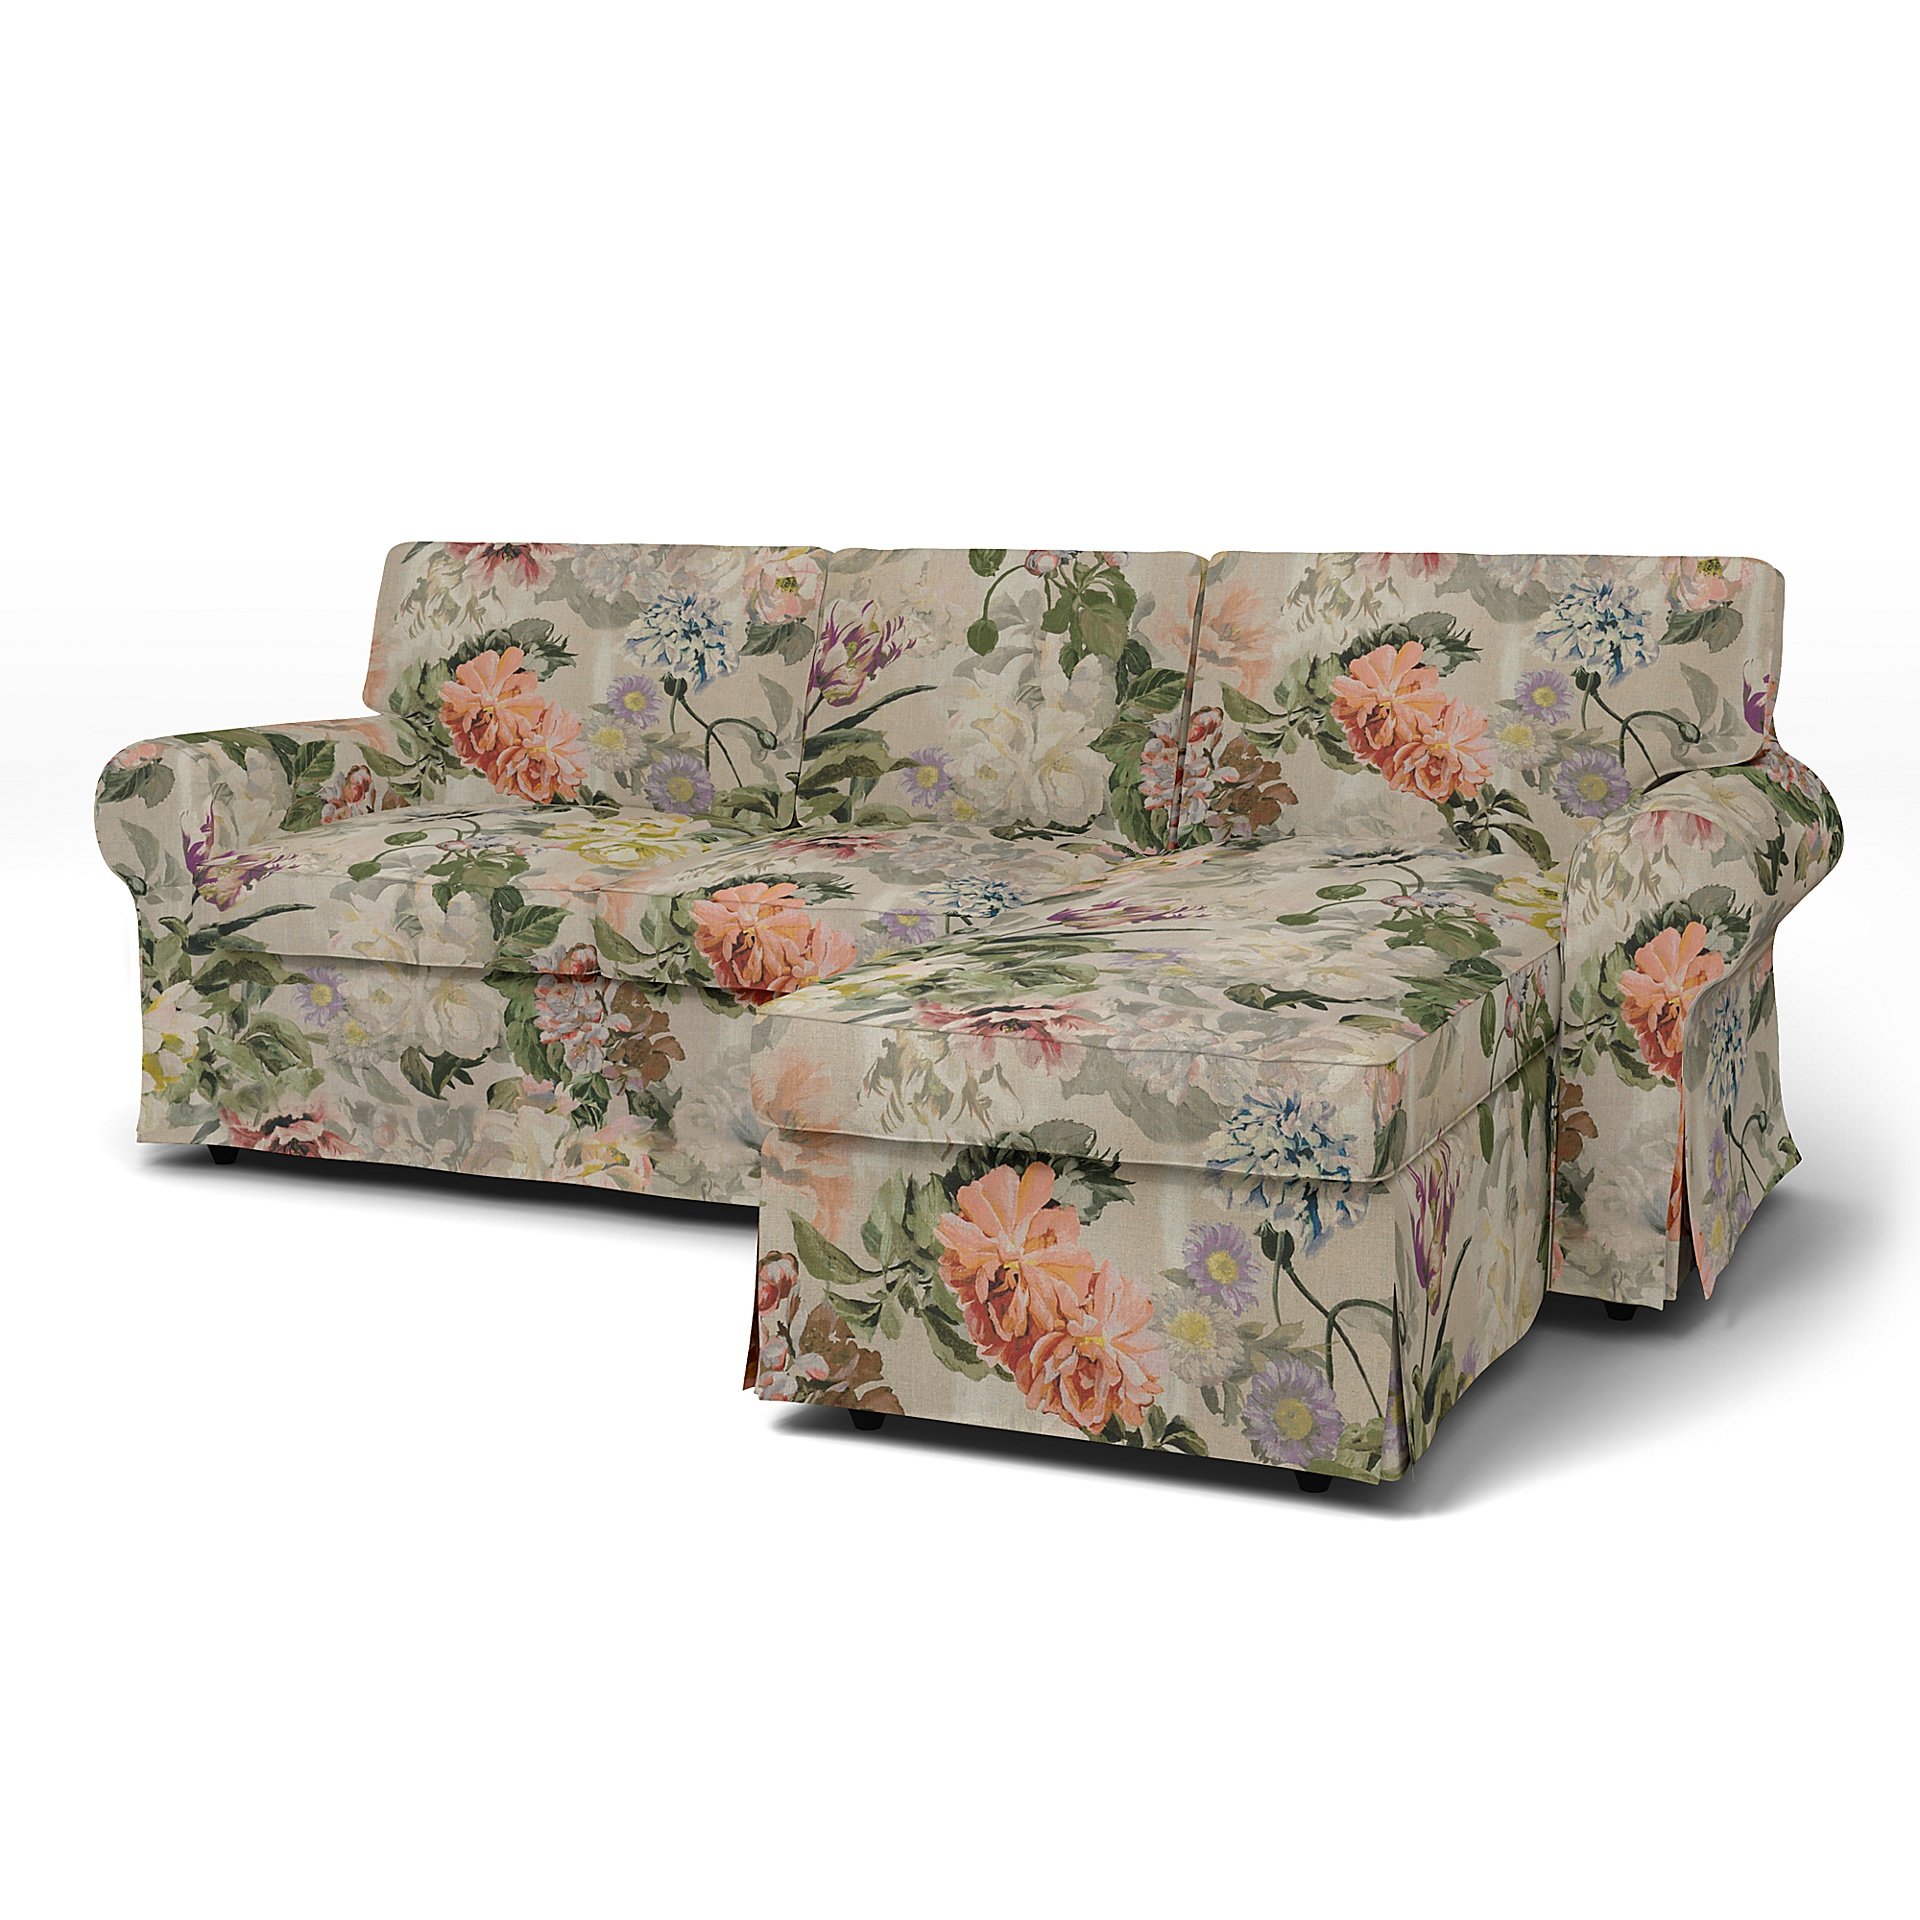 IKEA - Ektorp 3 Seater Sofa with Chaise Cover, Delft Flower - Tuberose, Linen - Bemz